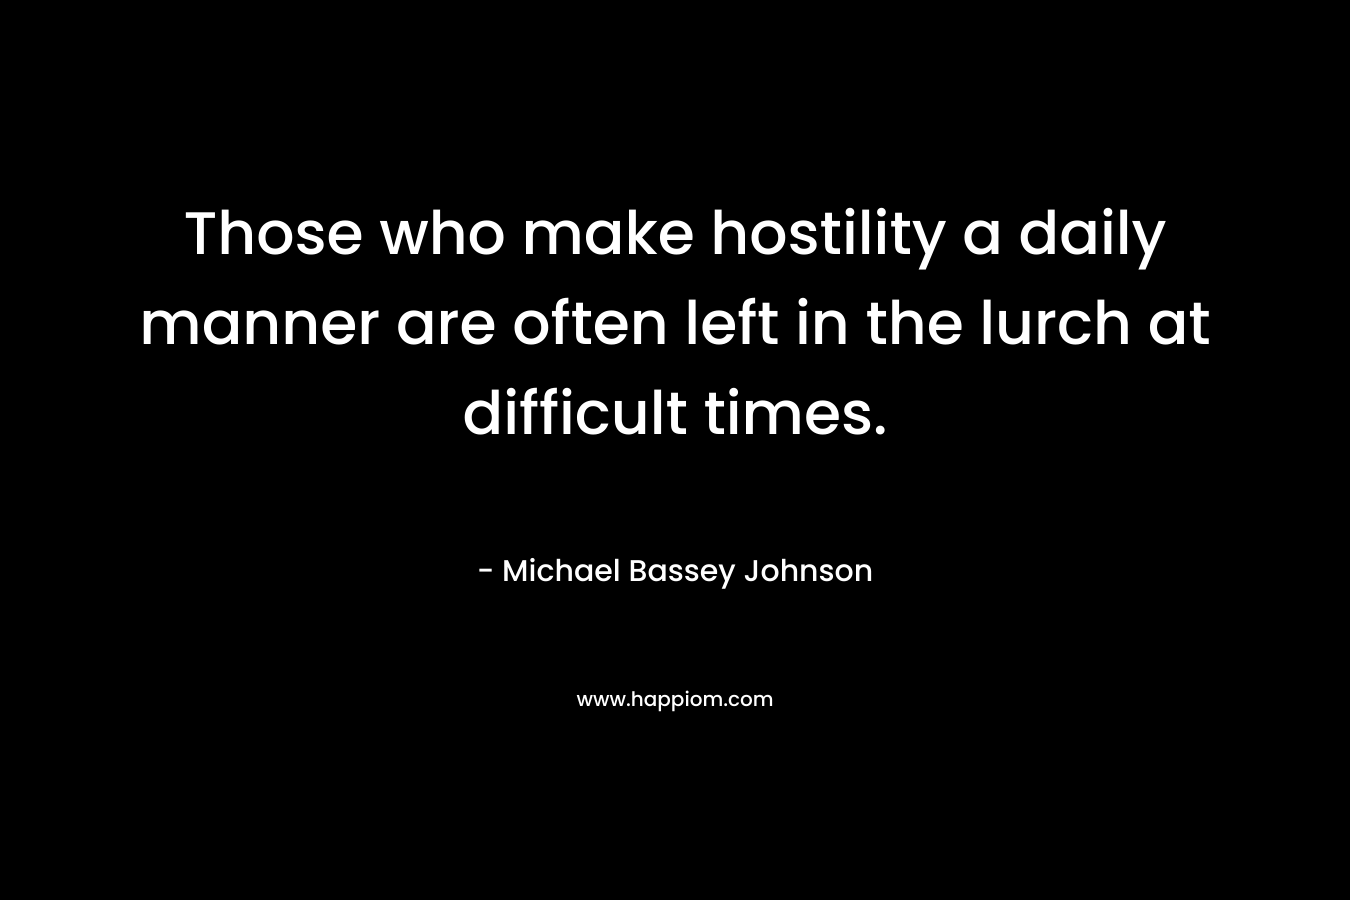 Those who make hostility a daily manner are often left in the lurch at difficult times.